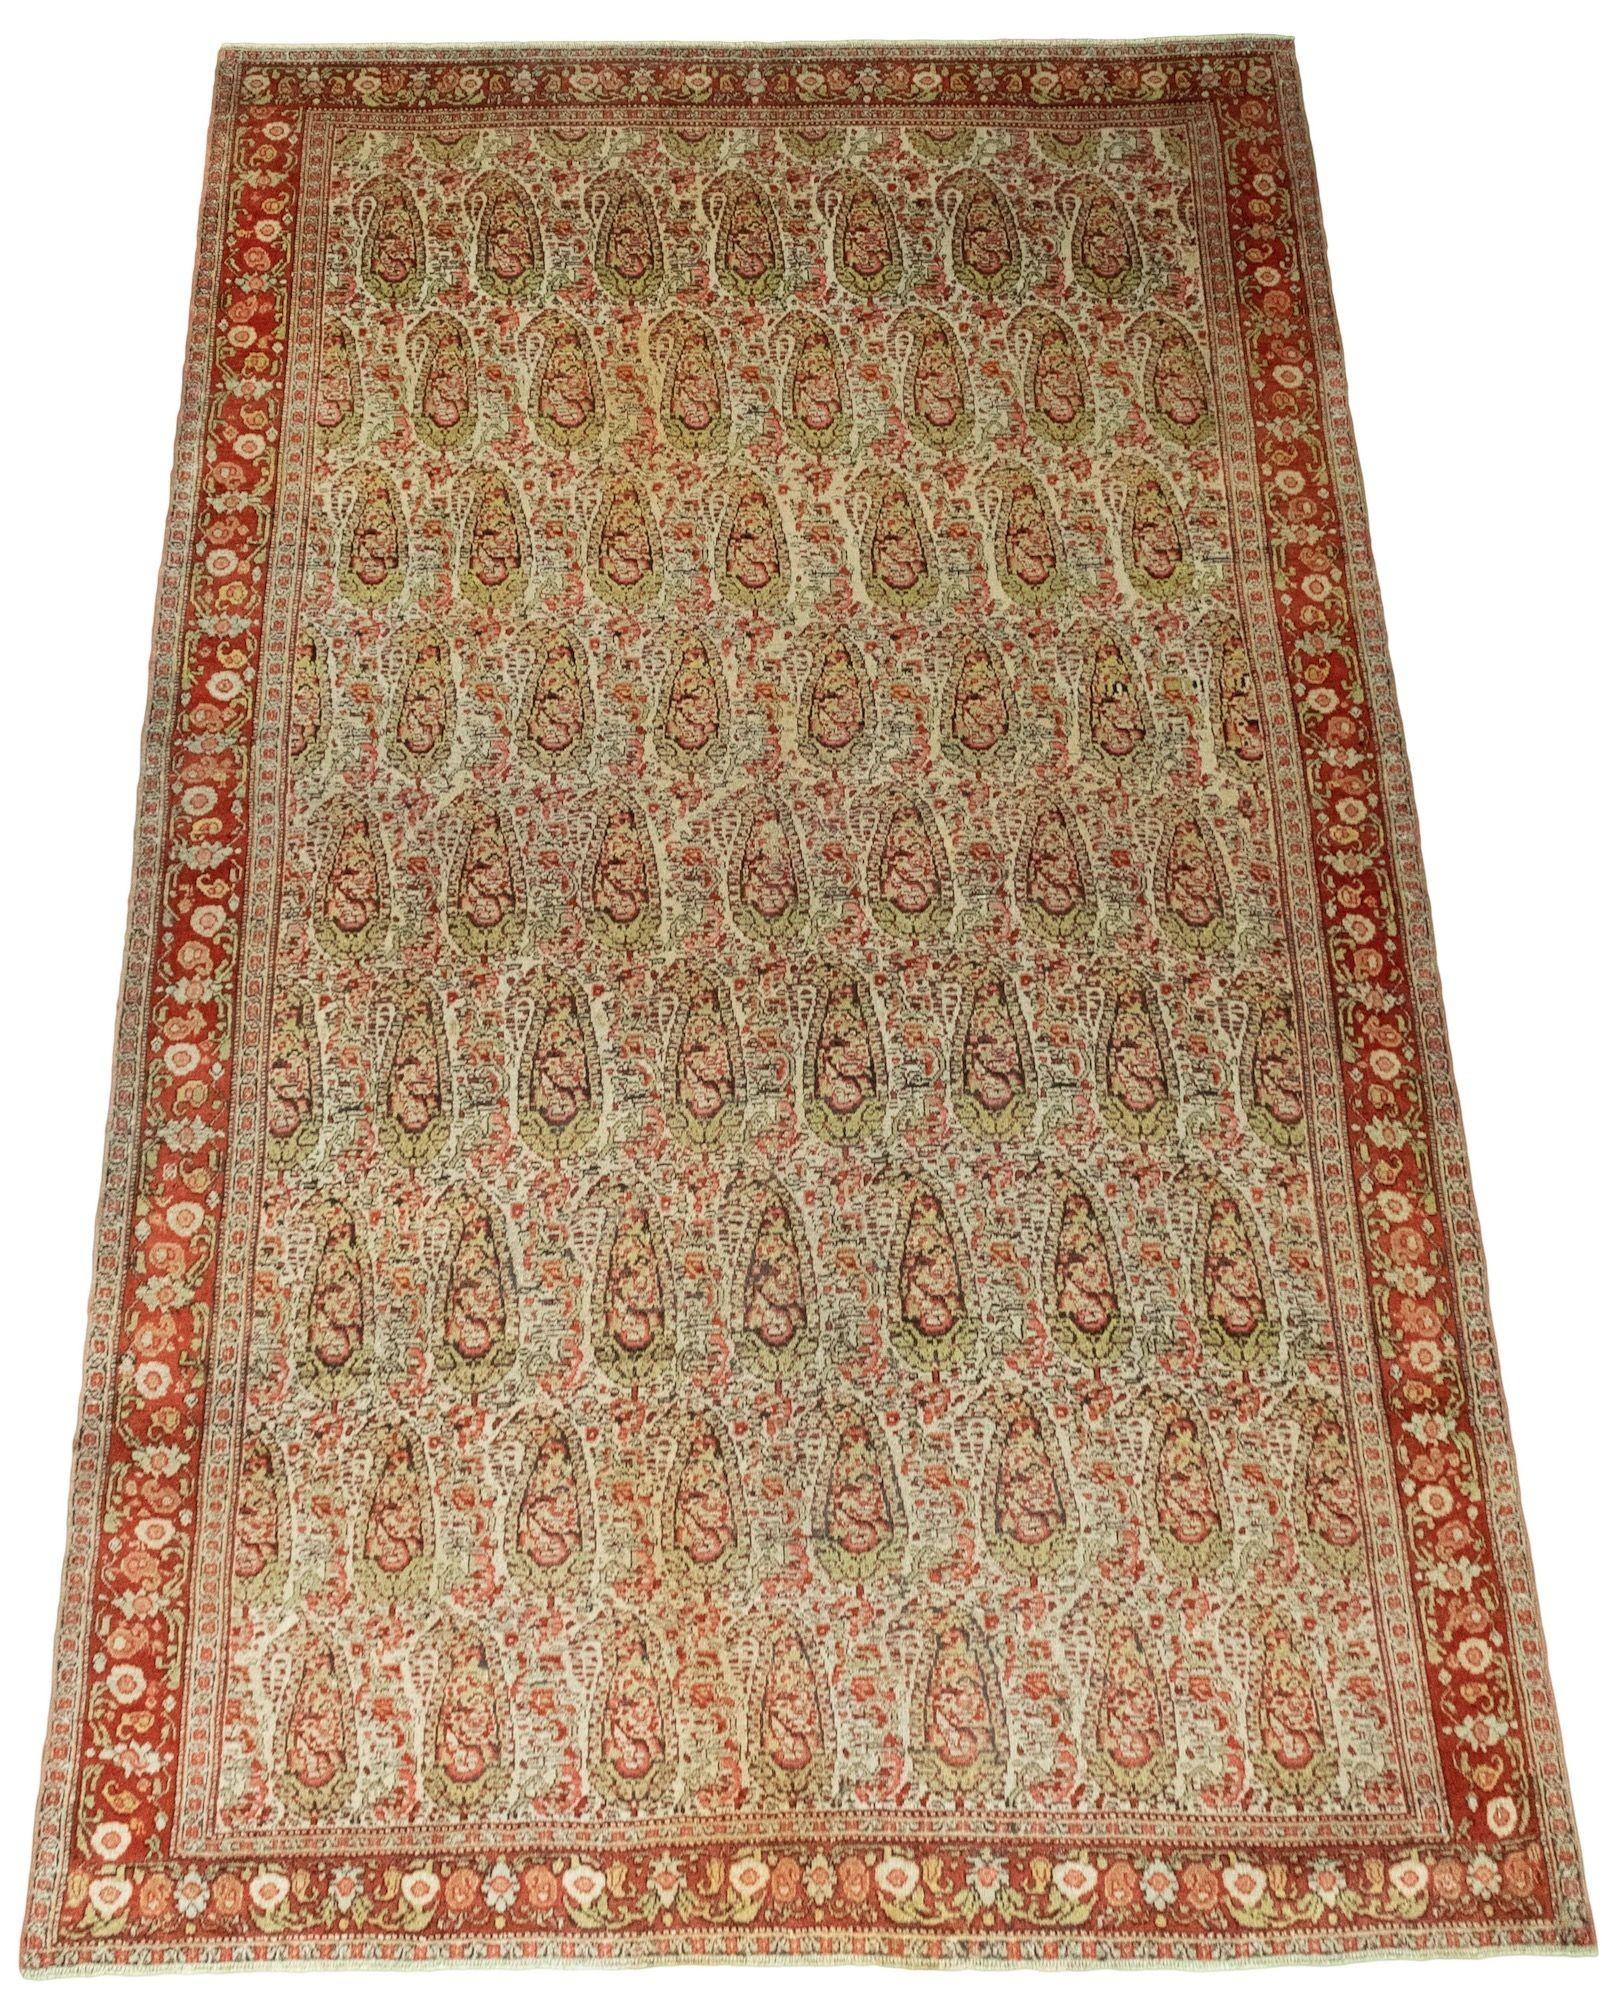 A wonderful antique Senneh rug, hand woven circa 1900 with an all over Boteh design on an ivory field and terracotta border. Very finely woven with wonderful secondary colours of greens and pinks and a very decorative rug.
Size: 2.02m x 1.36m (6ft